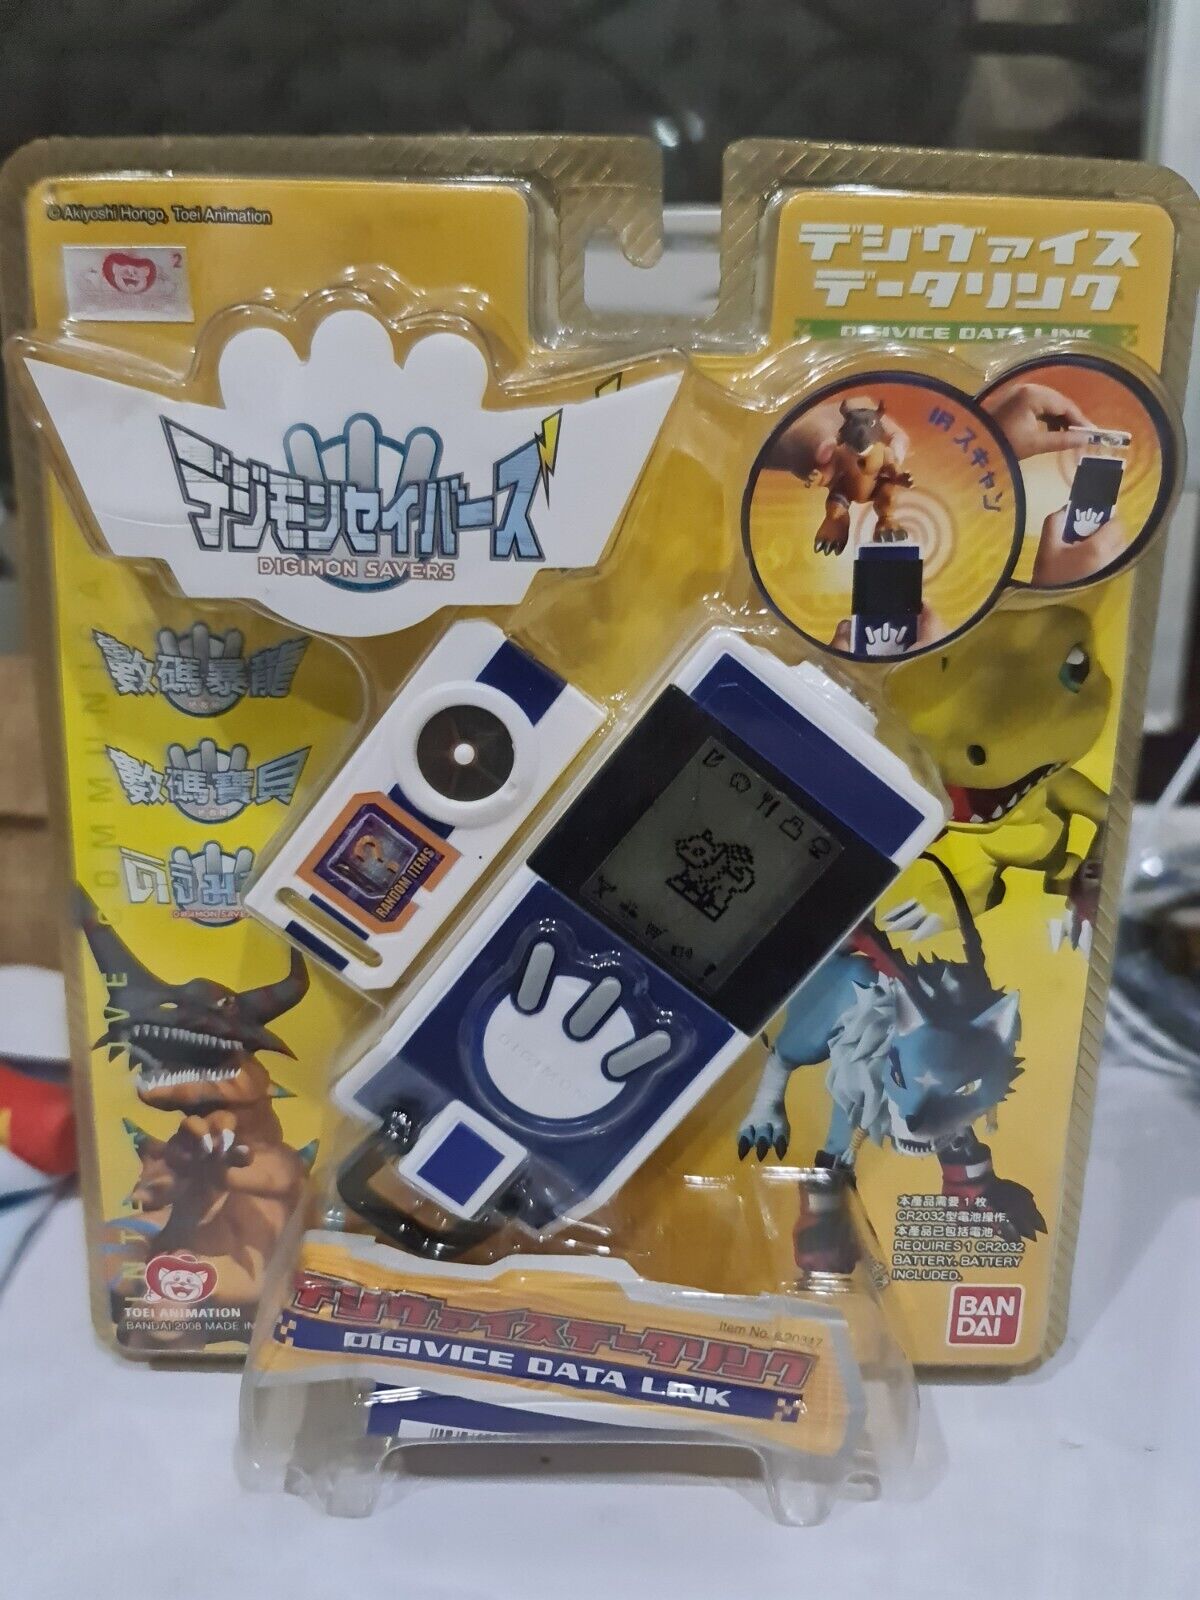 Bandai 2008 Digimon Savers [ Authentic Seal ] Digivice Data Link Fast Shipping